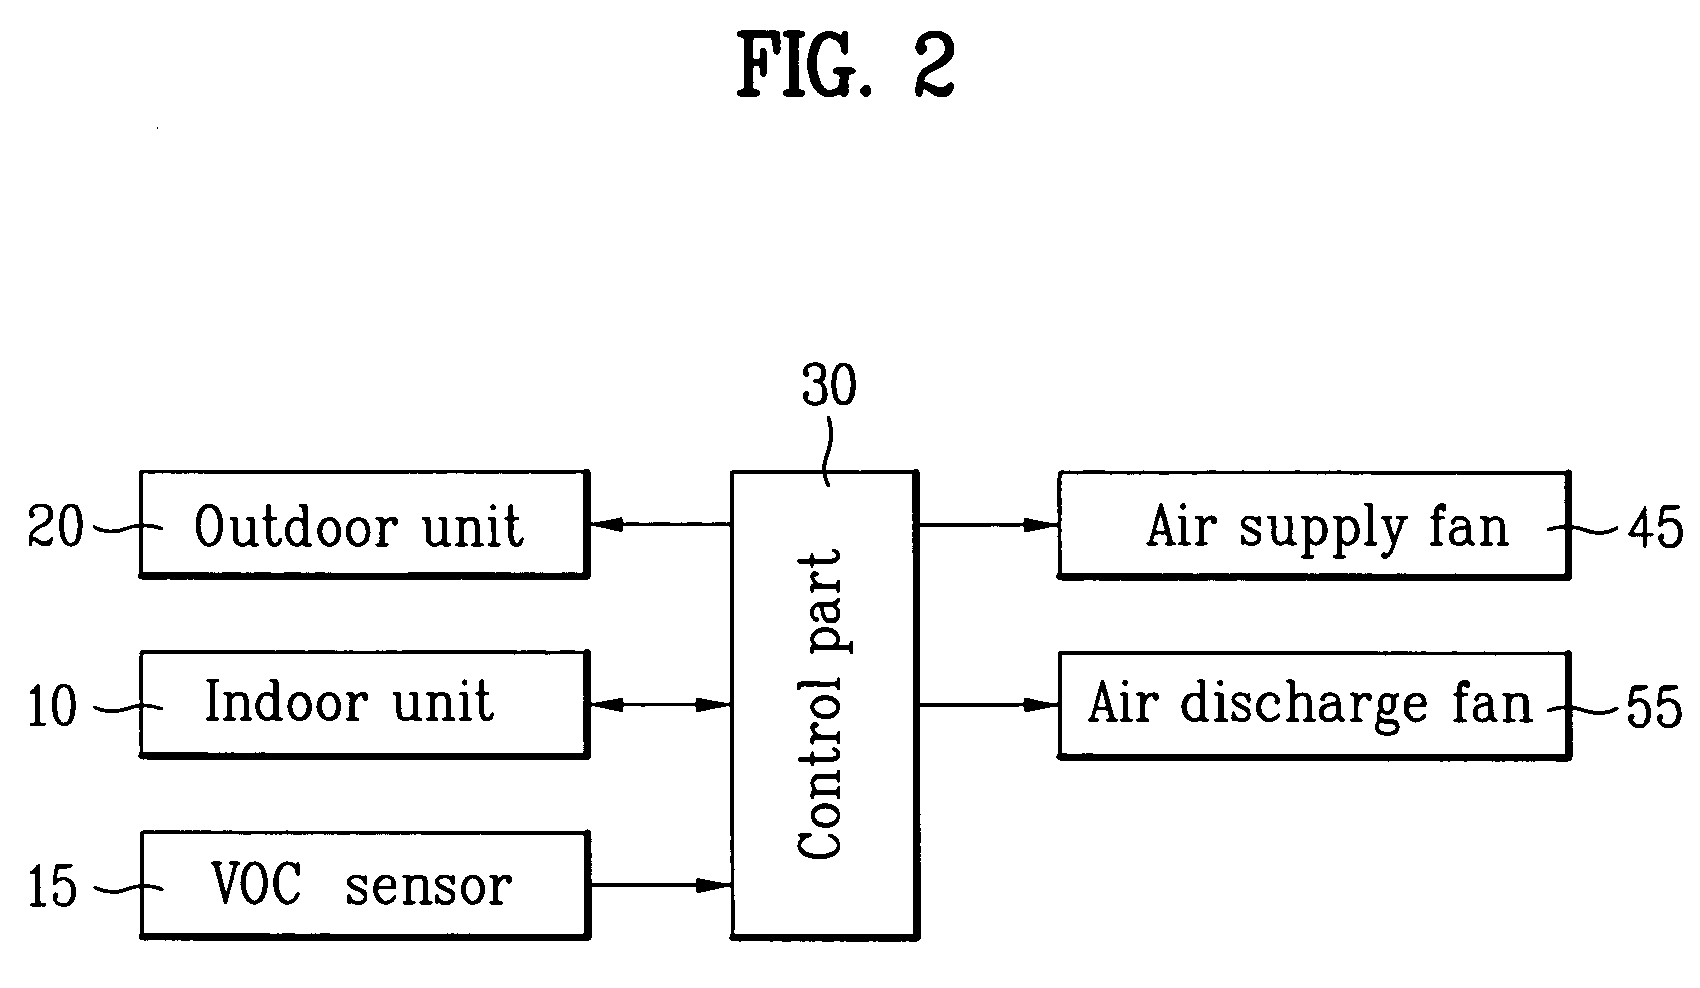 Method for controling air flow rate of air conditioning system